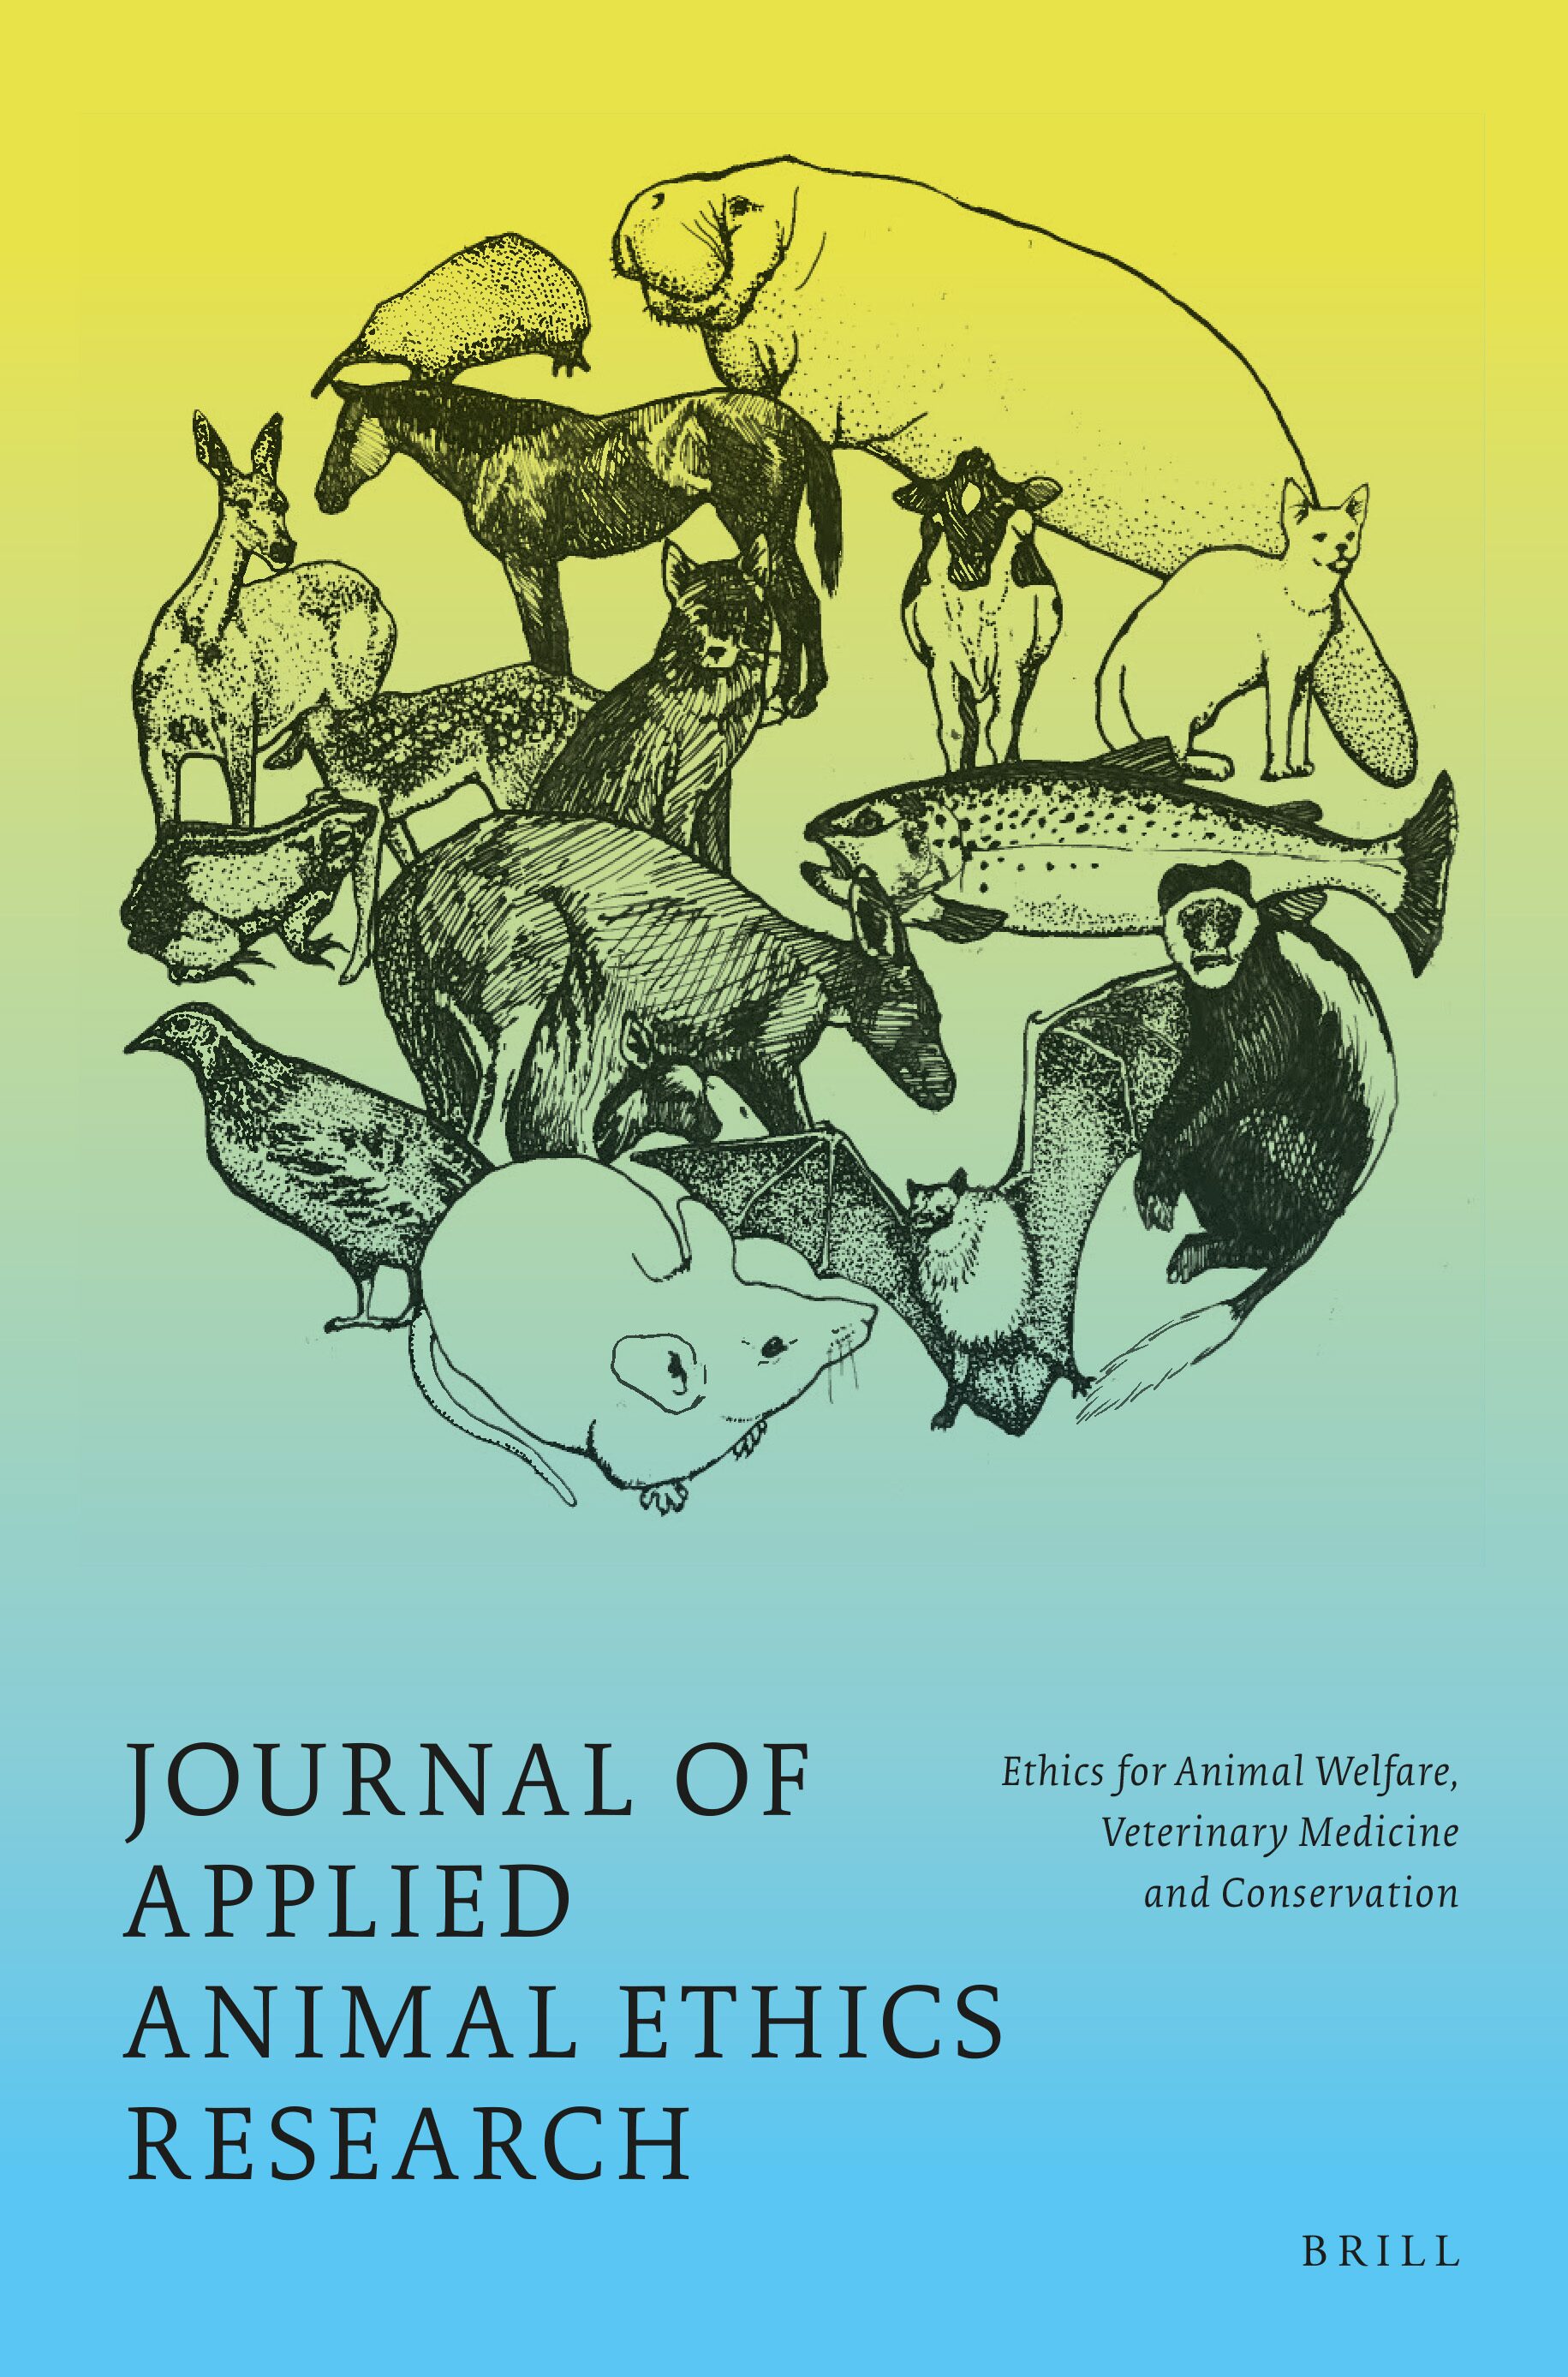 Capa do Journal of Apllied Animal Ethics Research